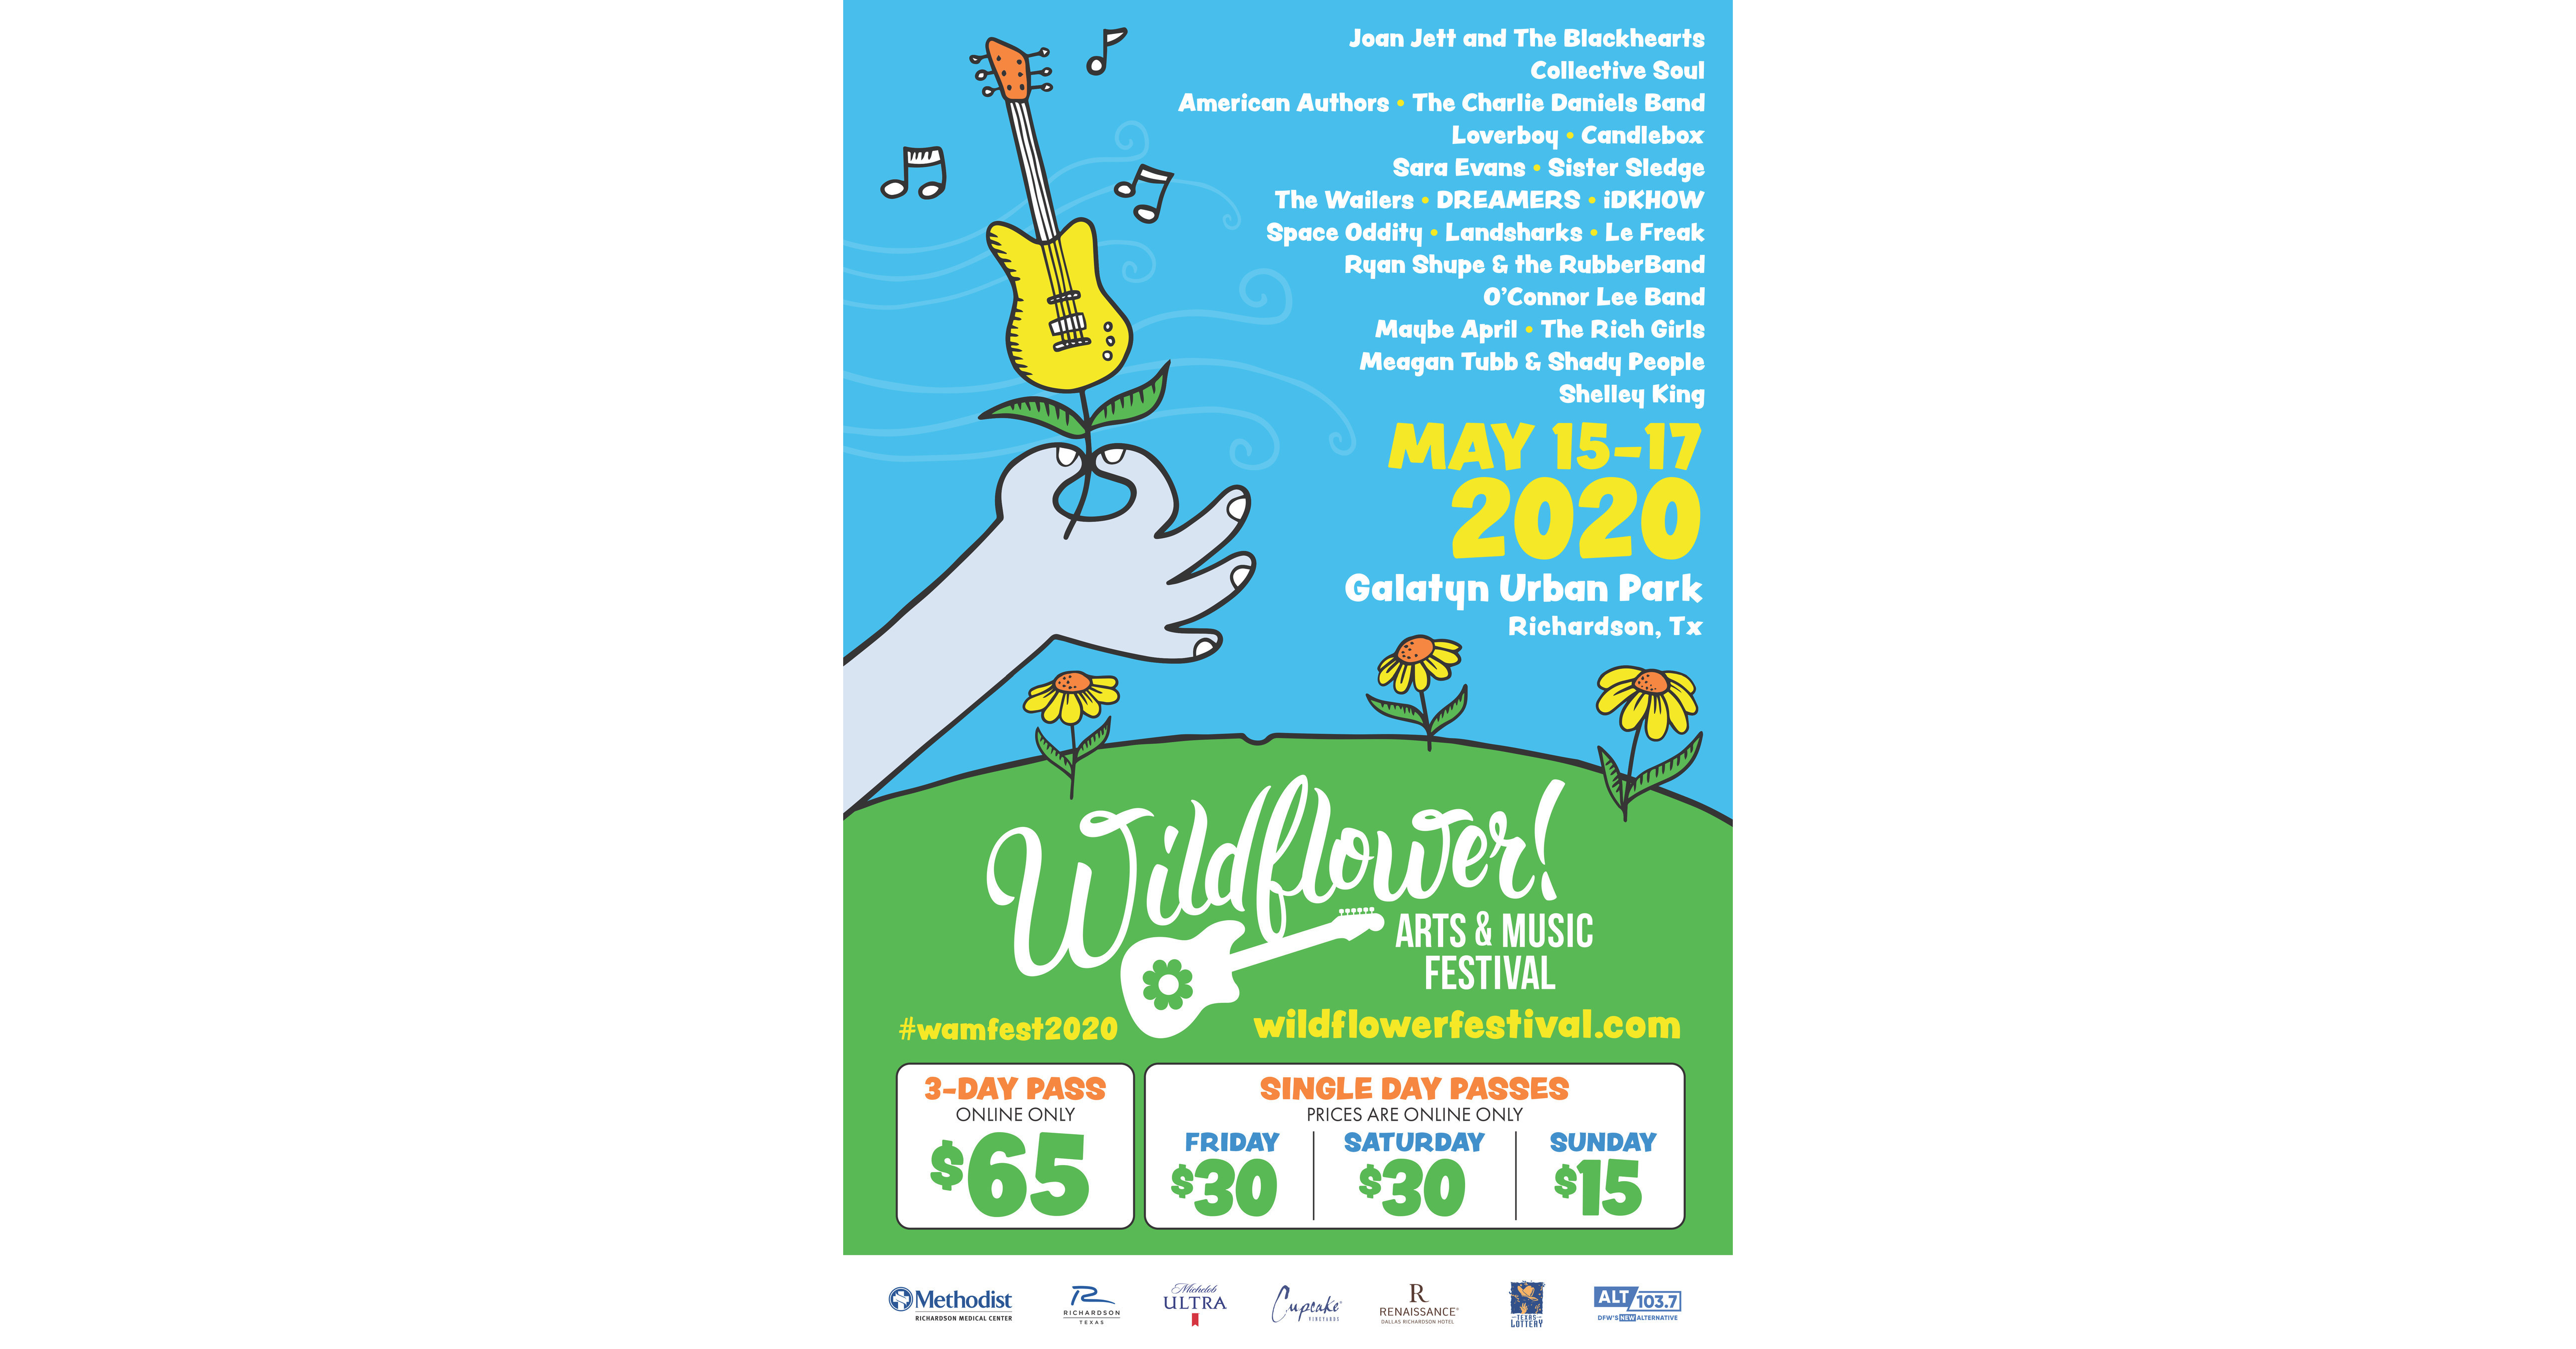 Headliners Announced to Rock Richardson's 28TH WILDFLOWER! ARTS & MUSIC